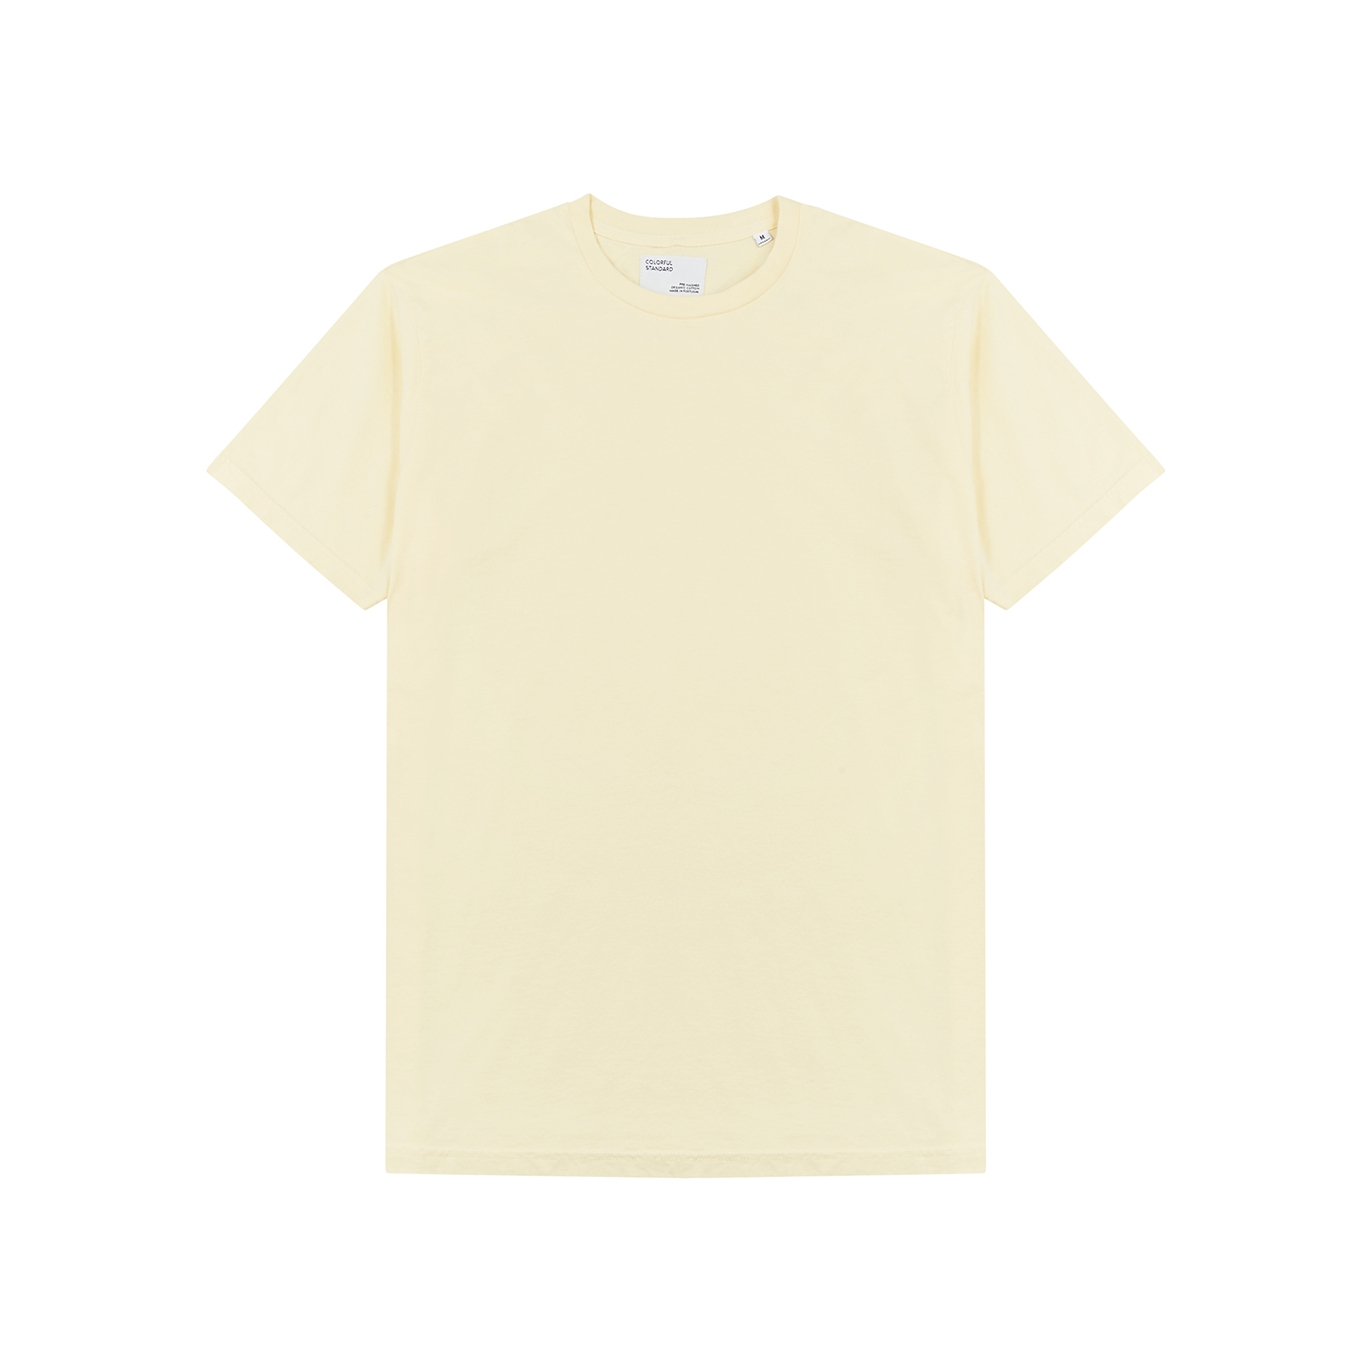 Colorful Standard Yellow Cotton T-shirt